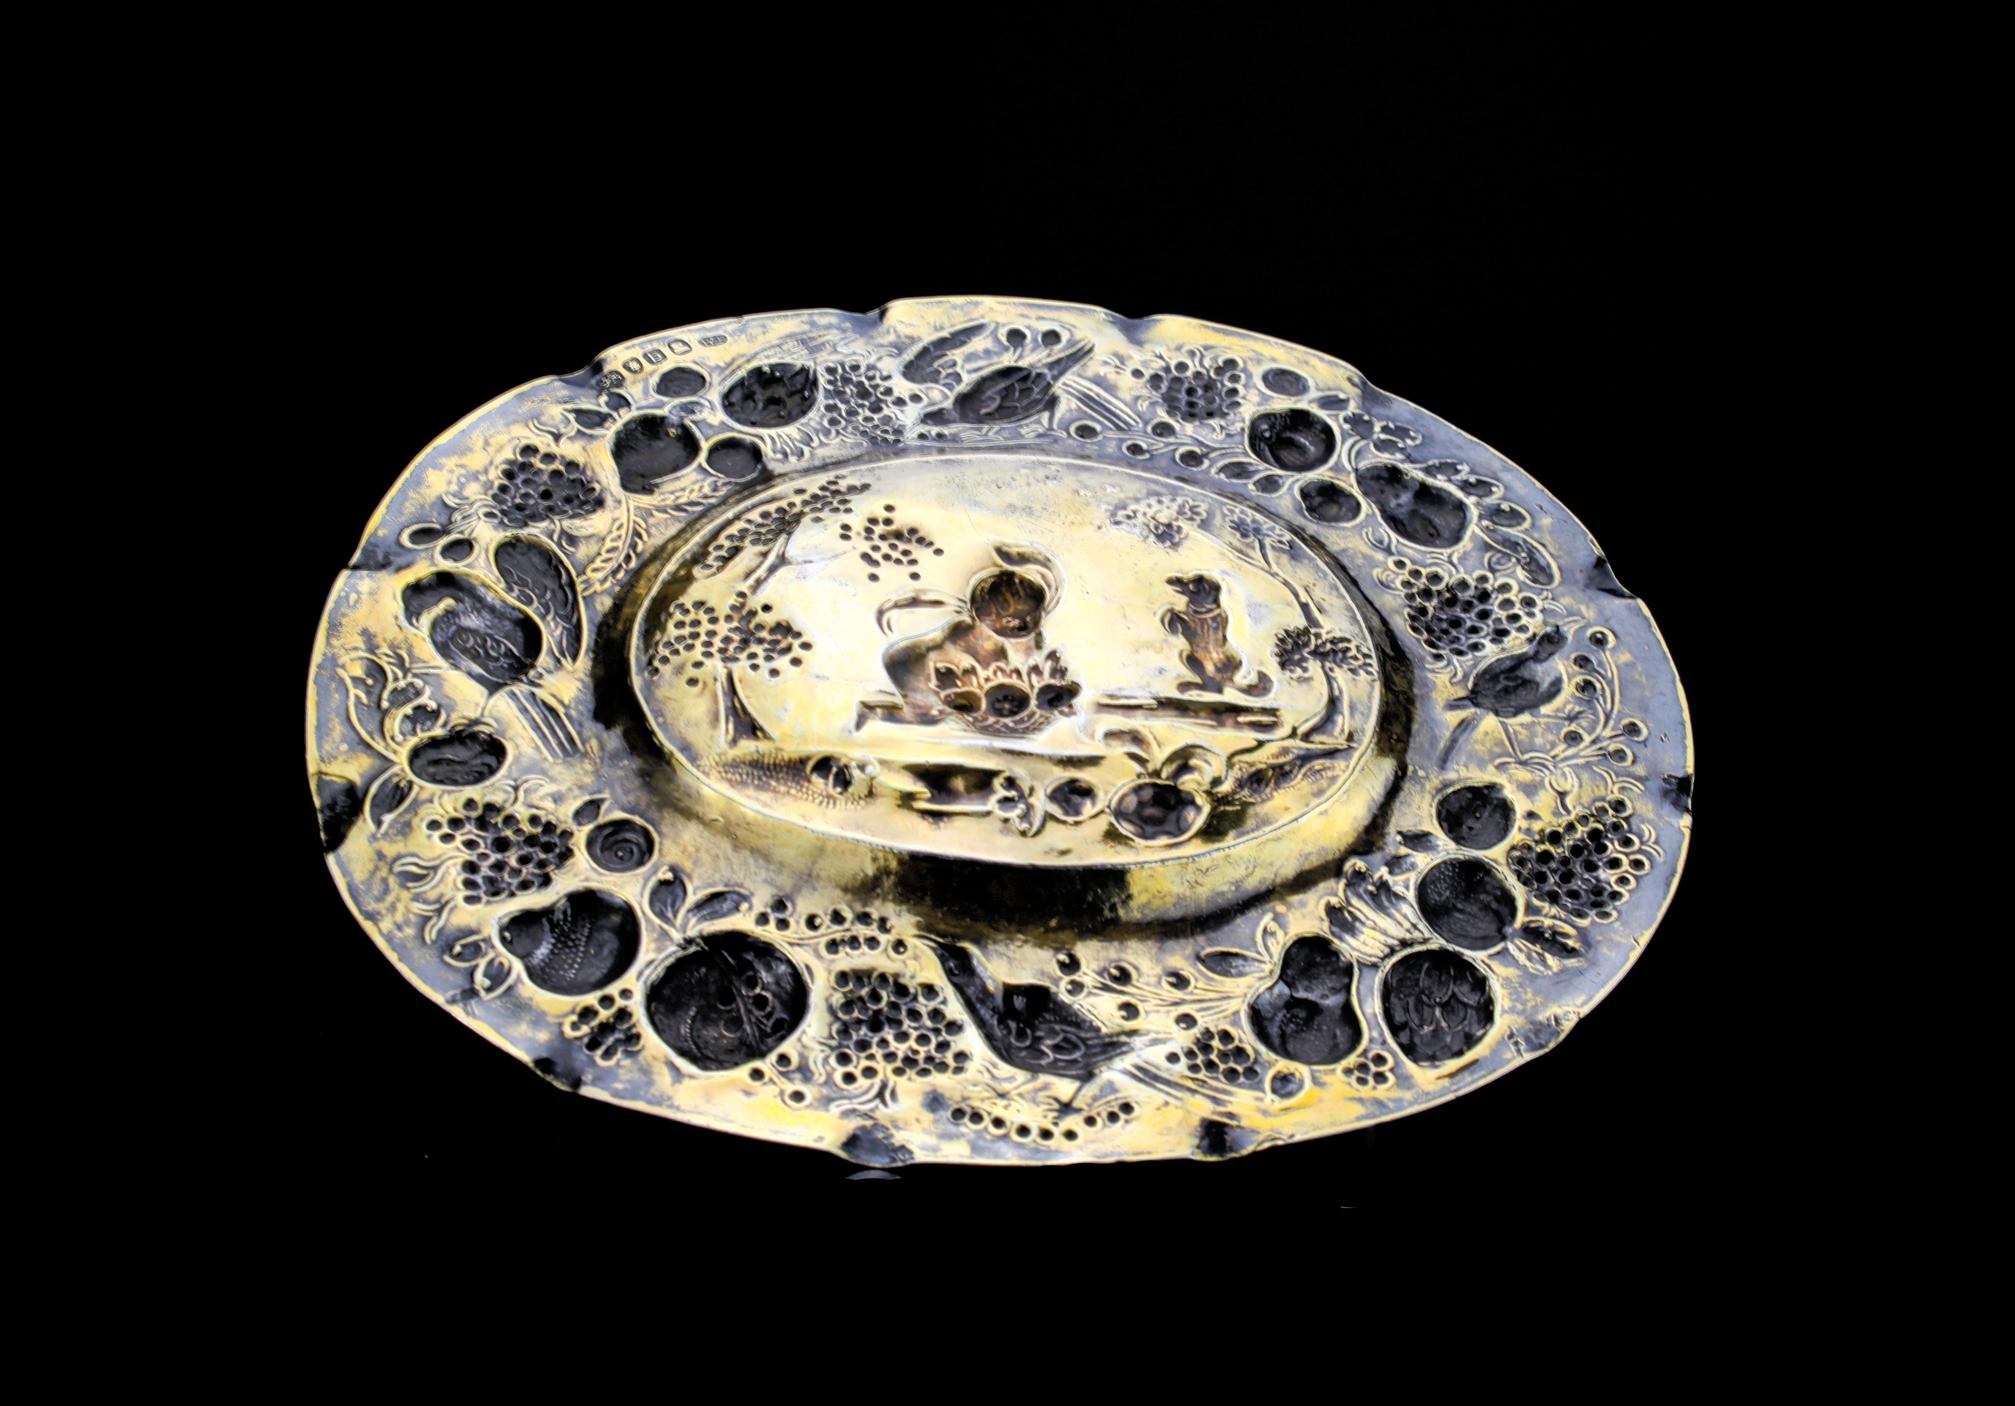 Antique Georgian silver gilt sideboard dish 

Made in London, 1817
Maker: William Pitts
Fully hallmarked.


Size: 20.3 x 17 x 1.8 cm
Weight: 174 grams

William Pitts, London silversmith, apprenticed to his father Thomas Pitts I, Citizen